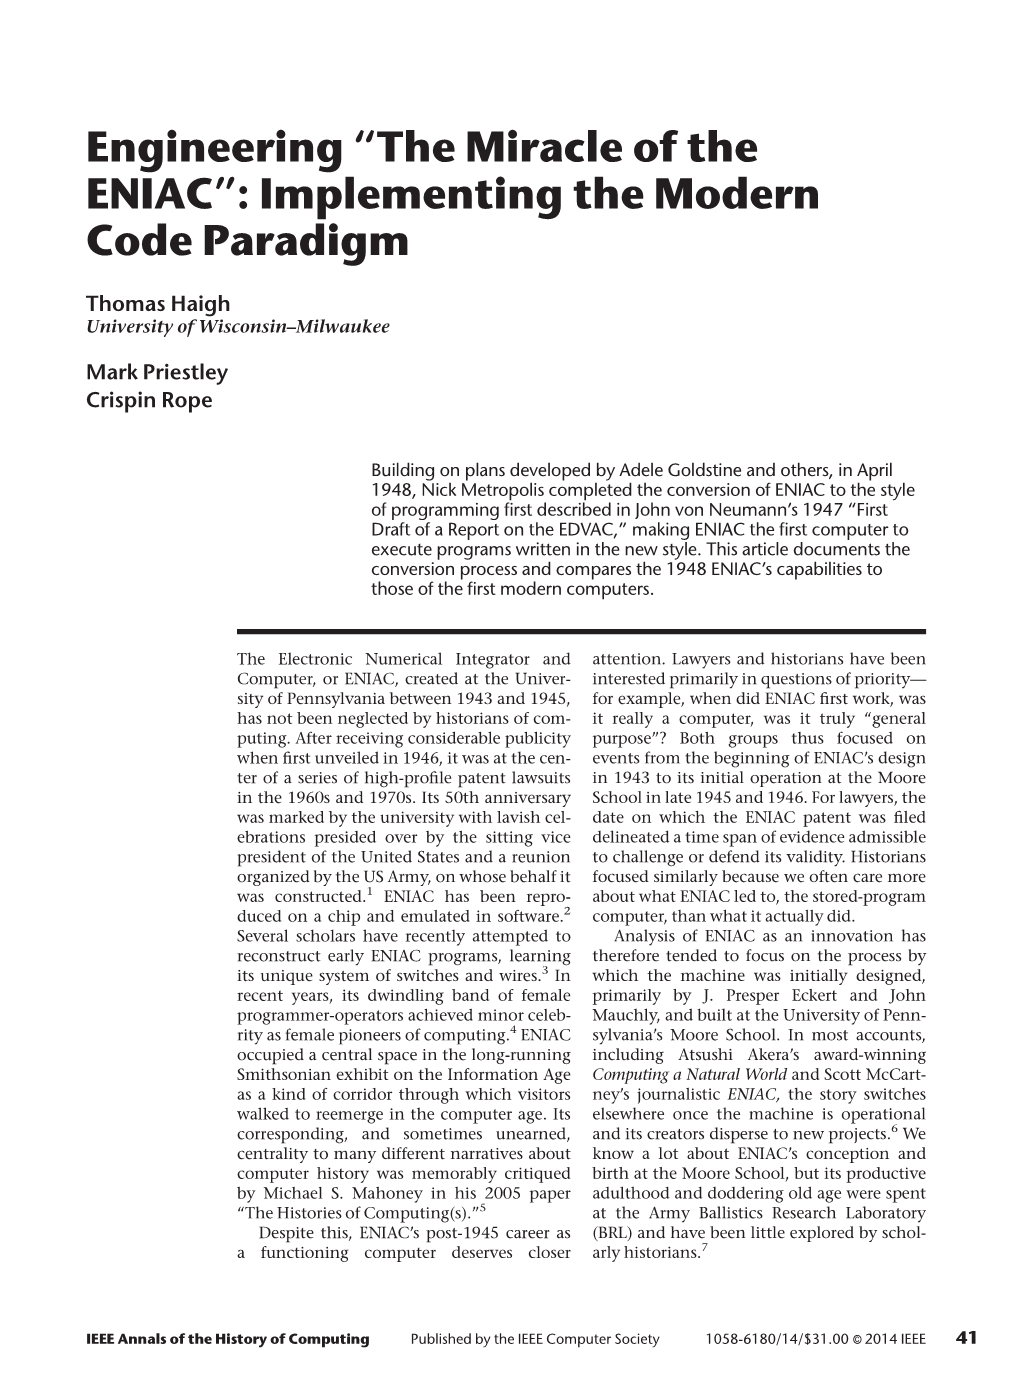 Engineering “The Miracle of the ENIAC”: Implementing the Modern Code Paradigm